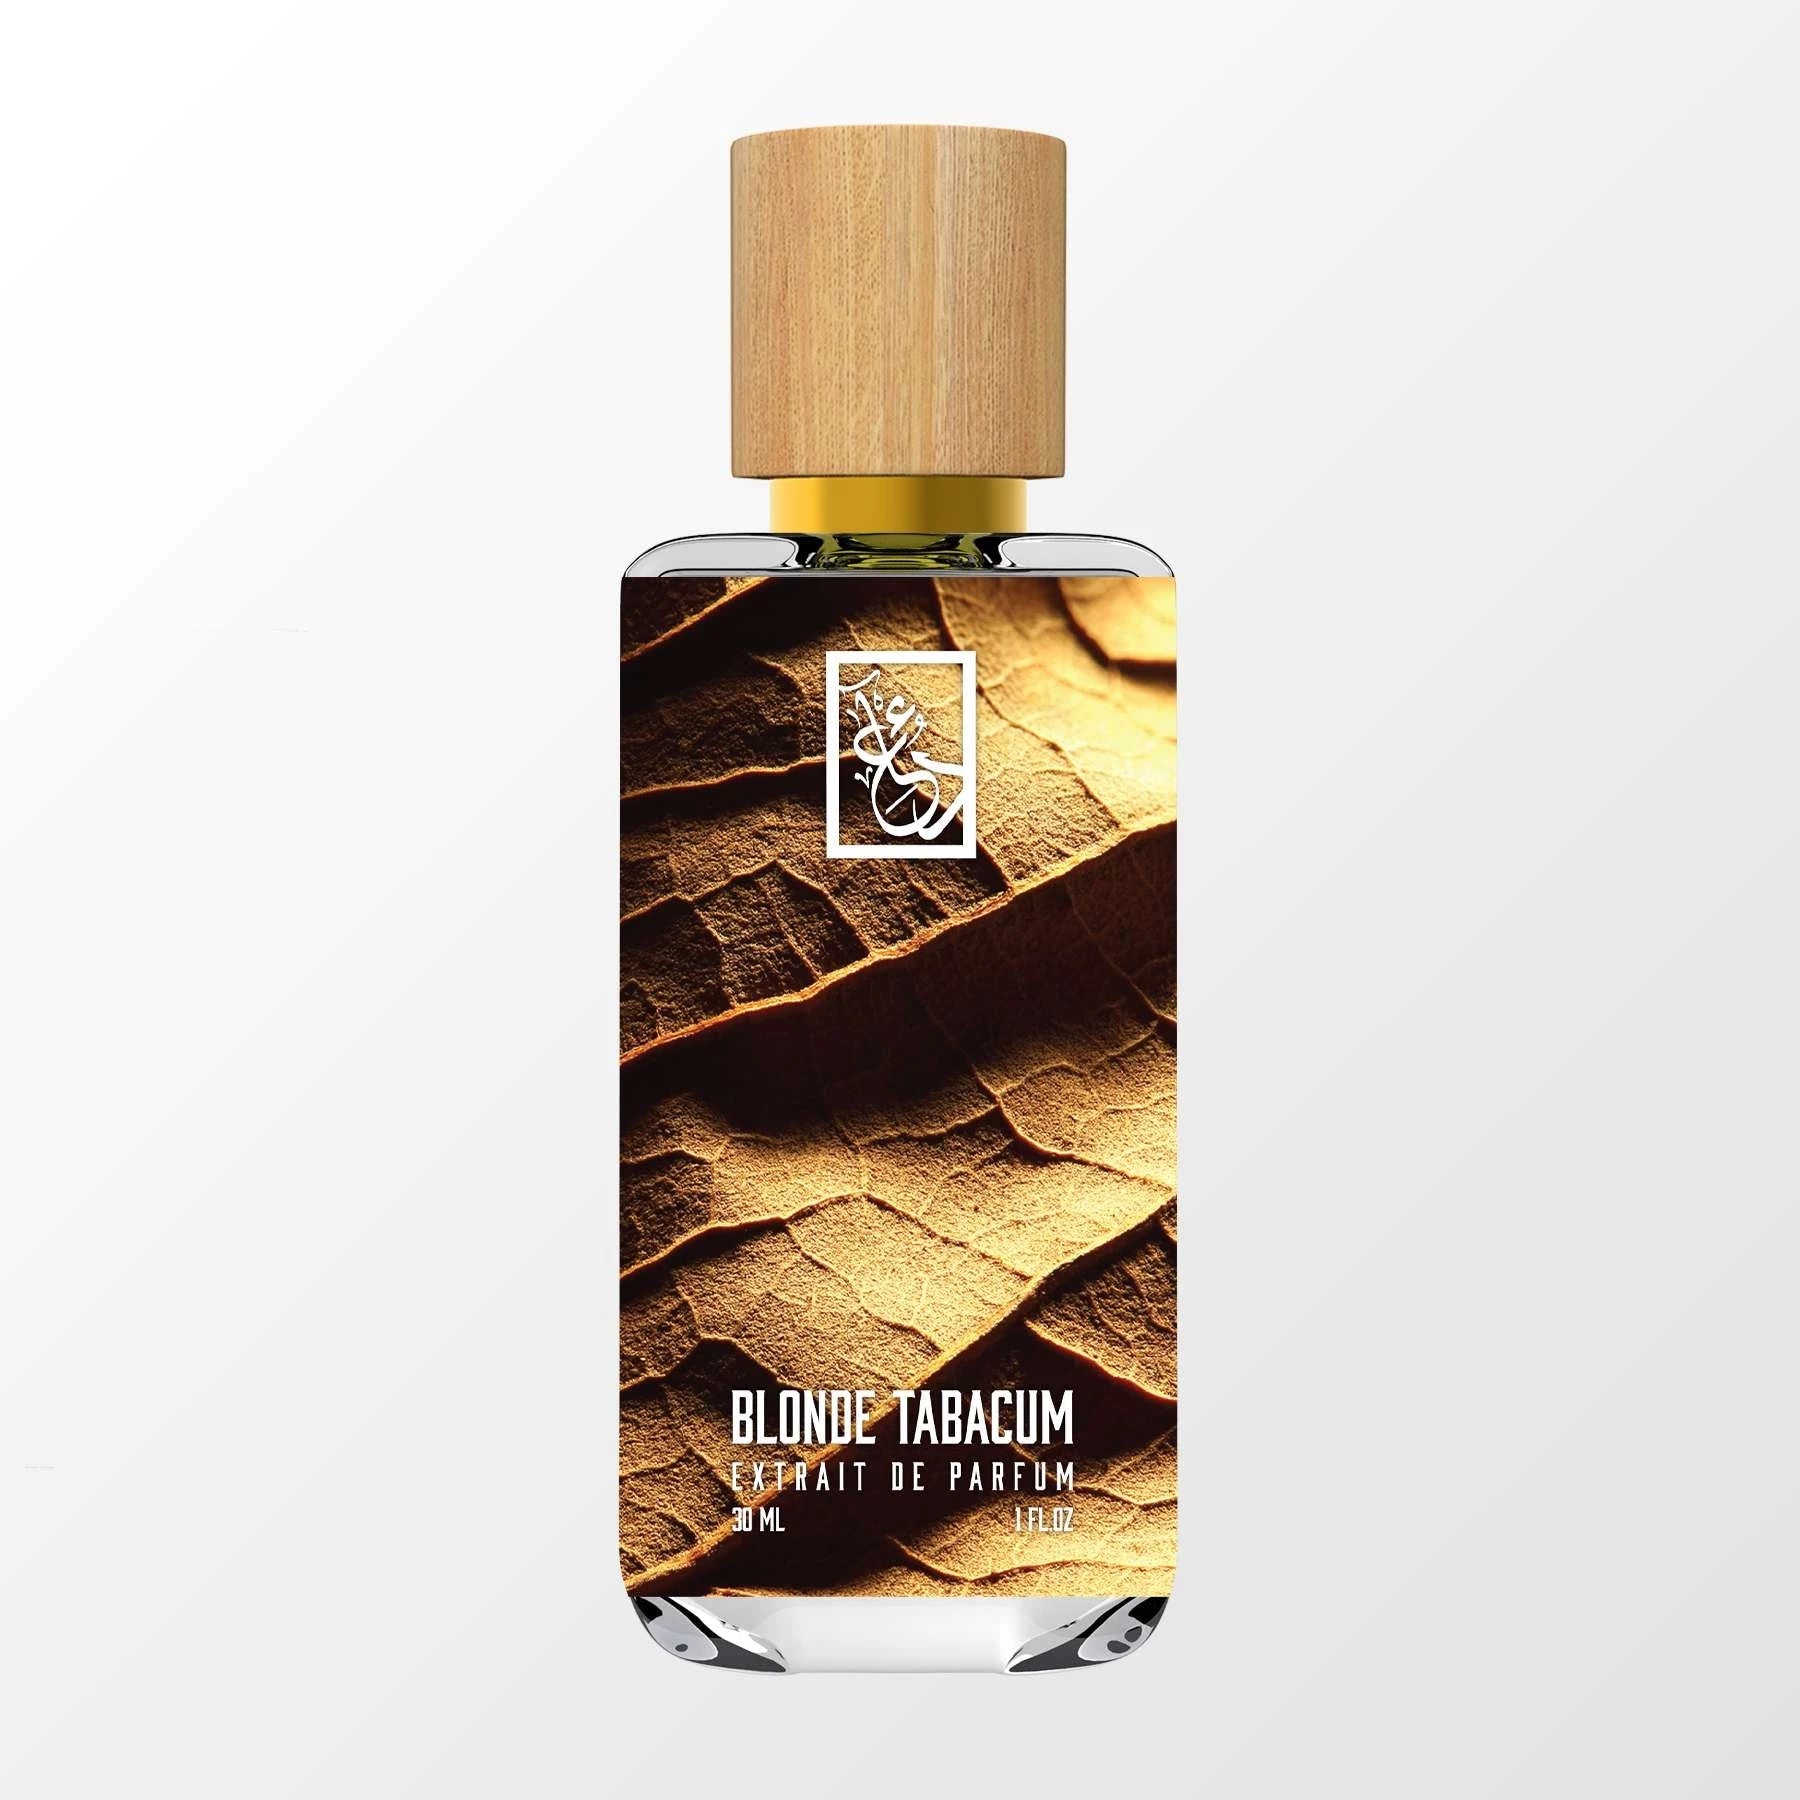 Louis Vuitton Releases Its First Oud Fragrance, Ombre Nomade